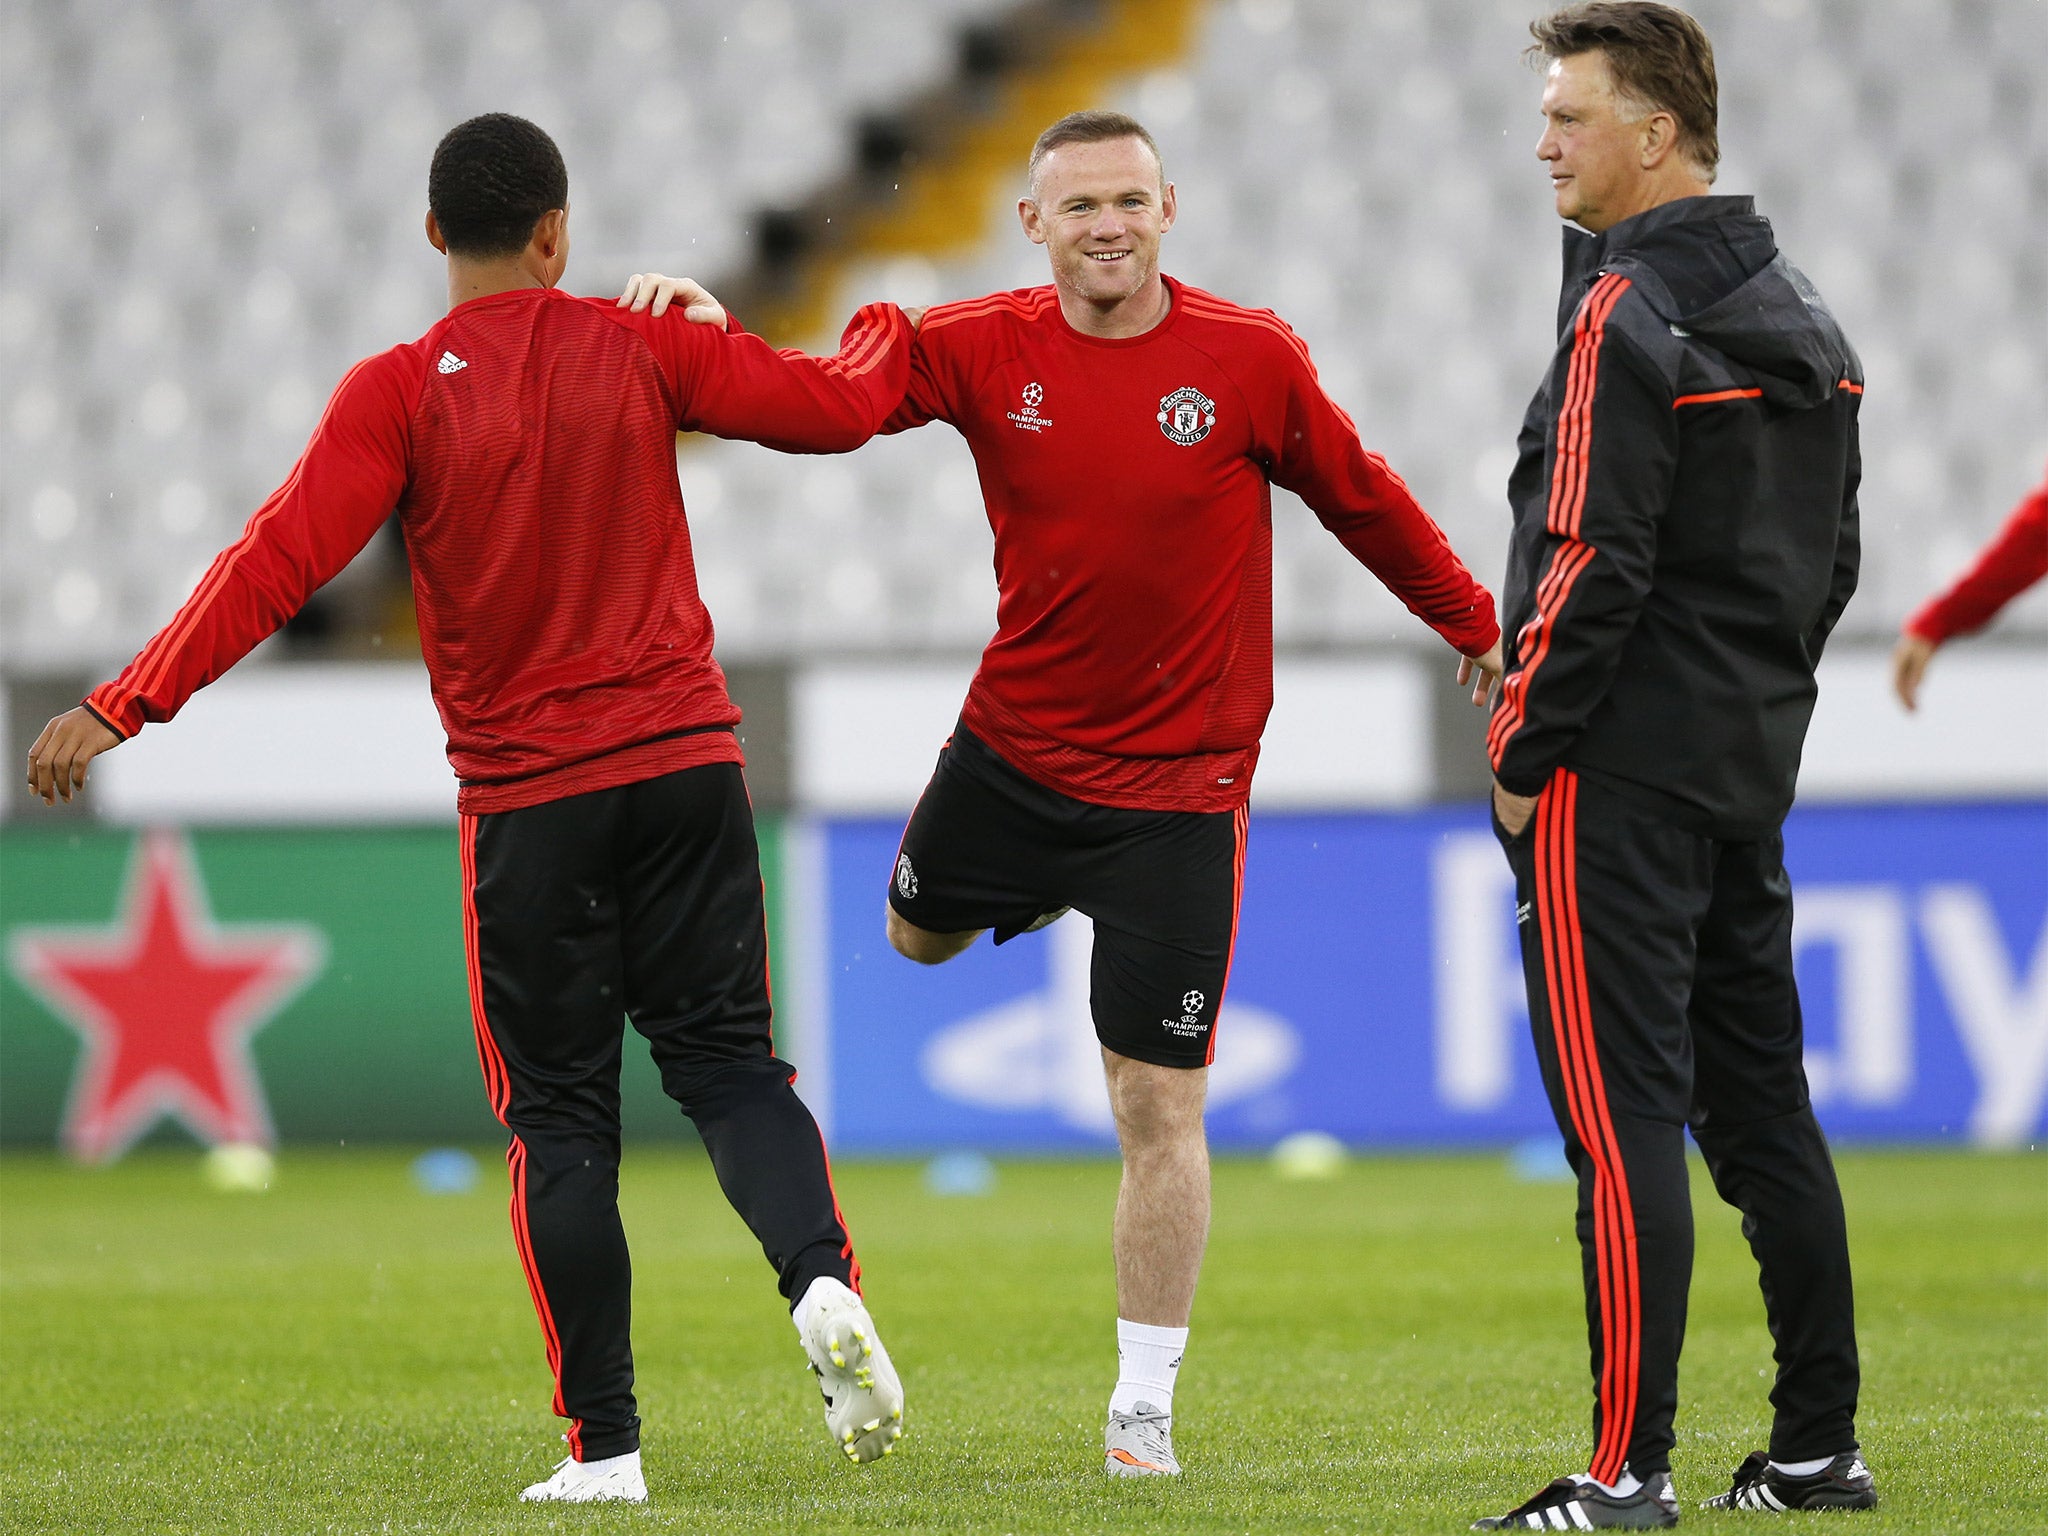 Louis van Gaal has a word with Wayne Rooney during Tuesday's training session